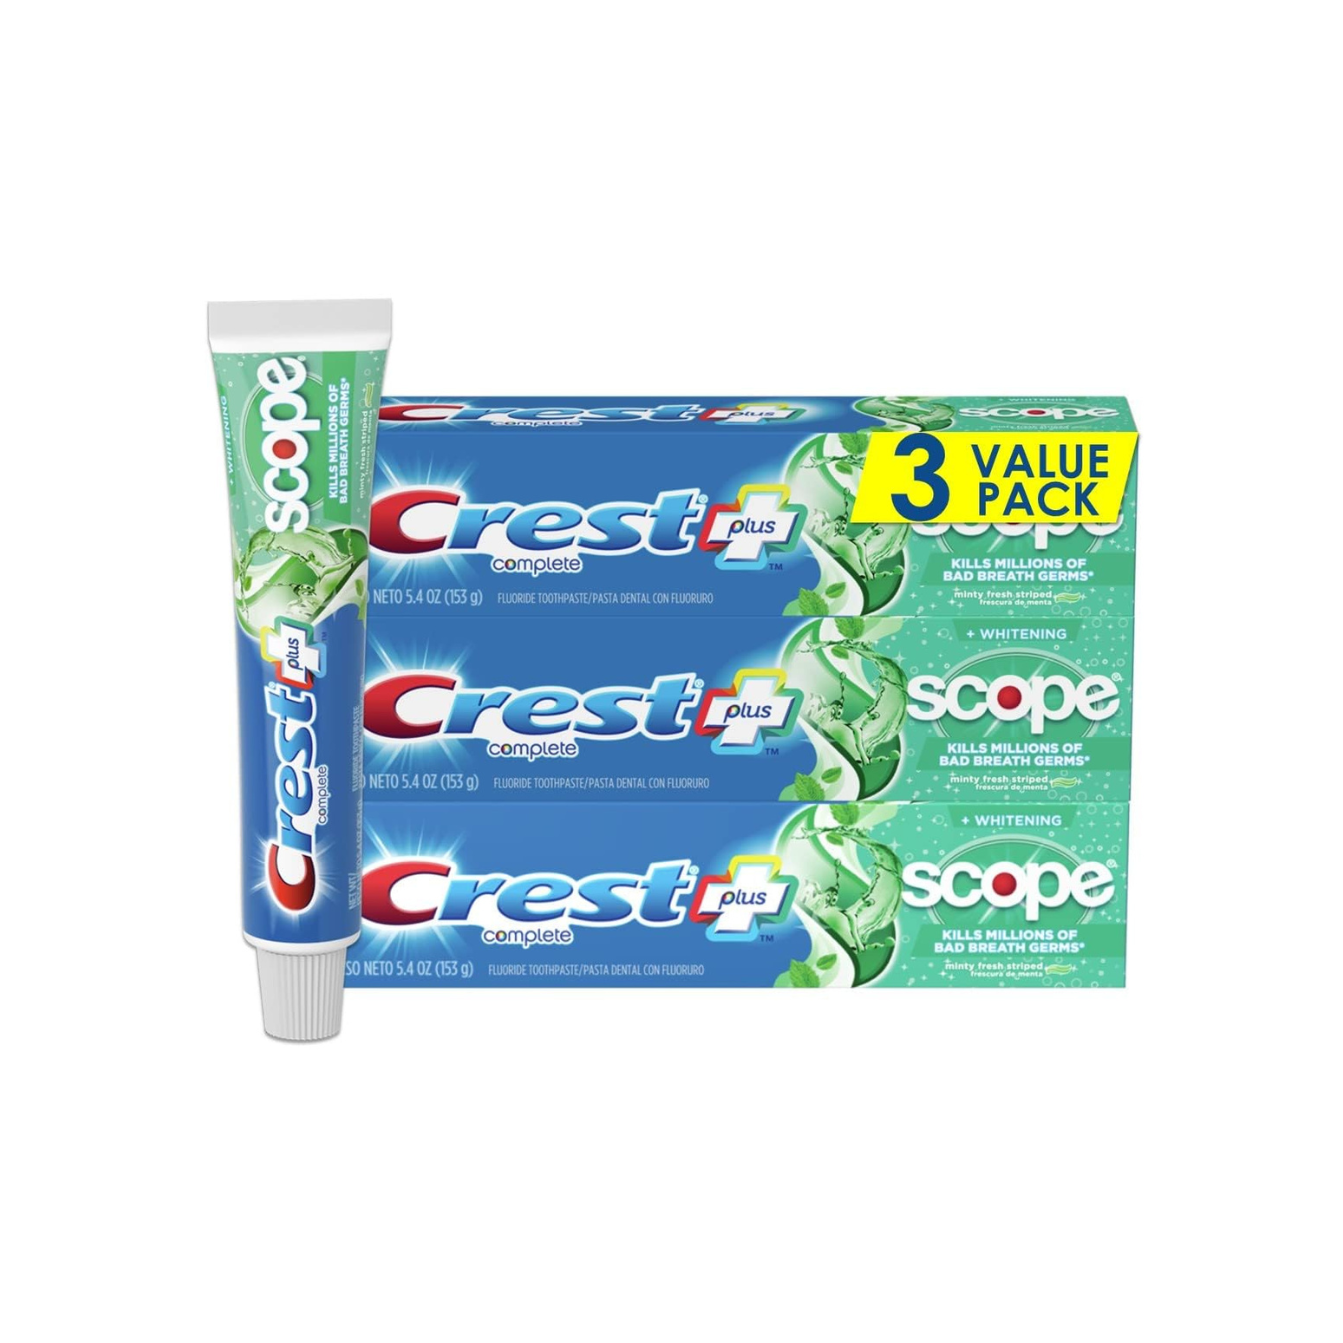 Crest + Scope Complete Whitening Toothpaste, Minty Fresh (5.a4 Oz, Pack of 3)